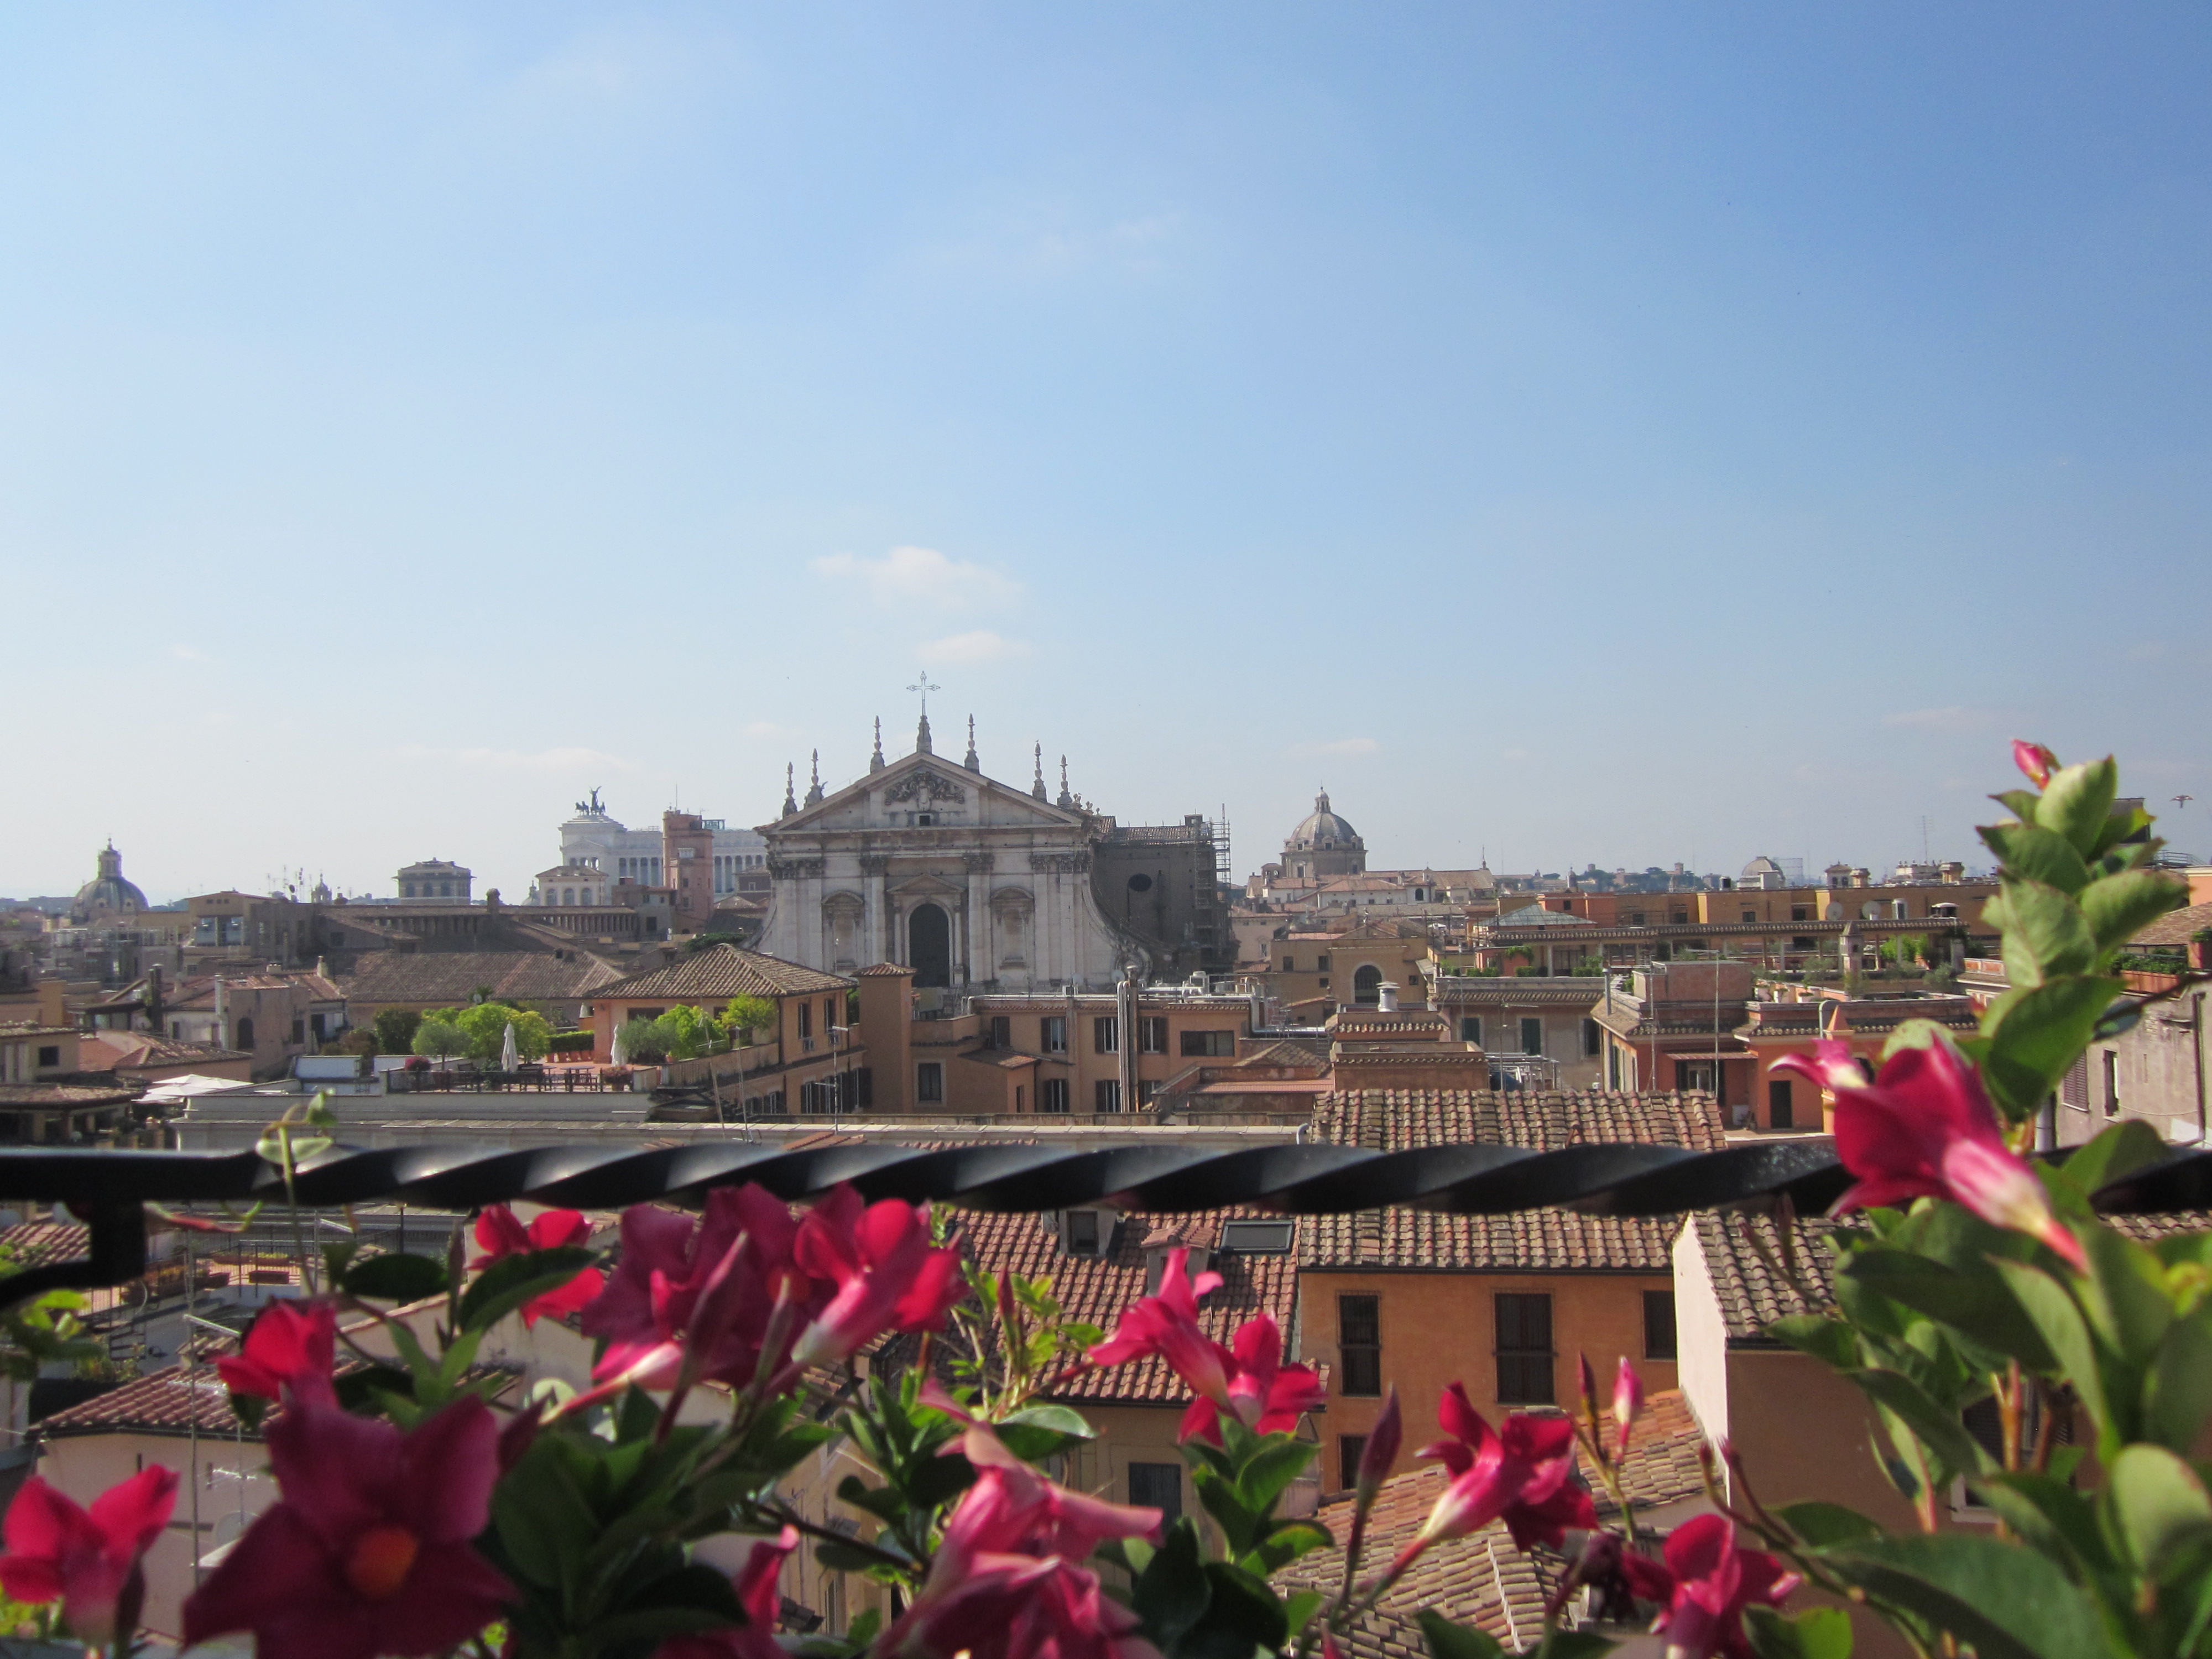 Pink flowers in the foreground with Italian buildings in the background, Rome